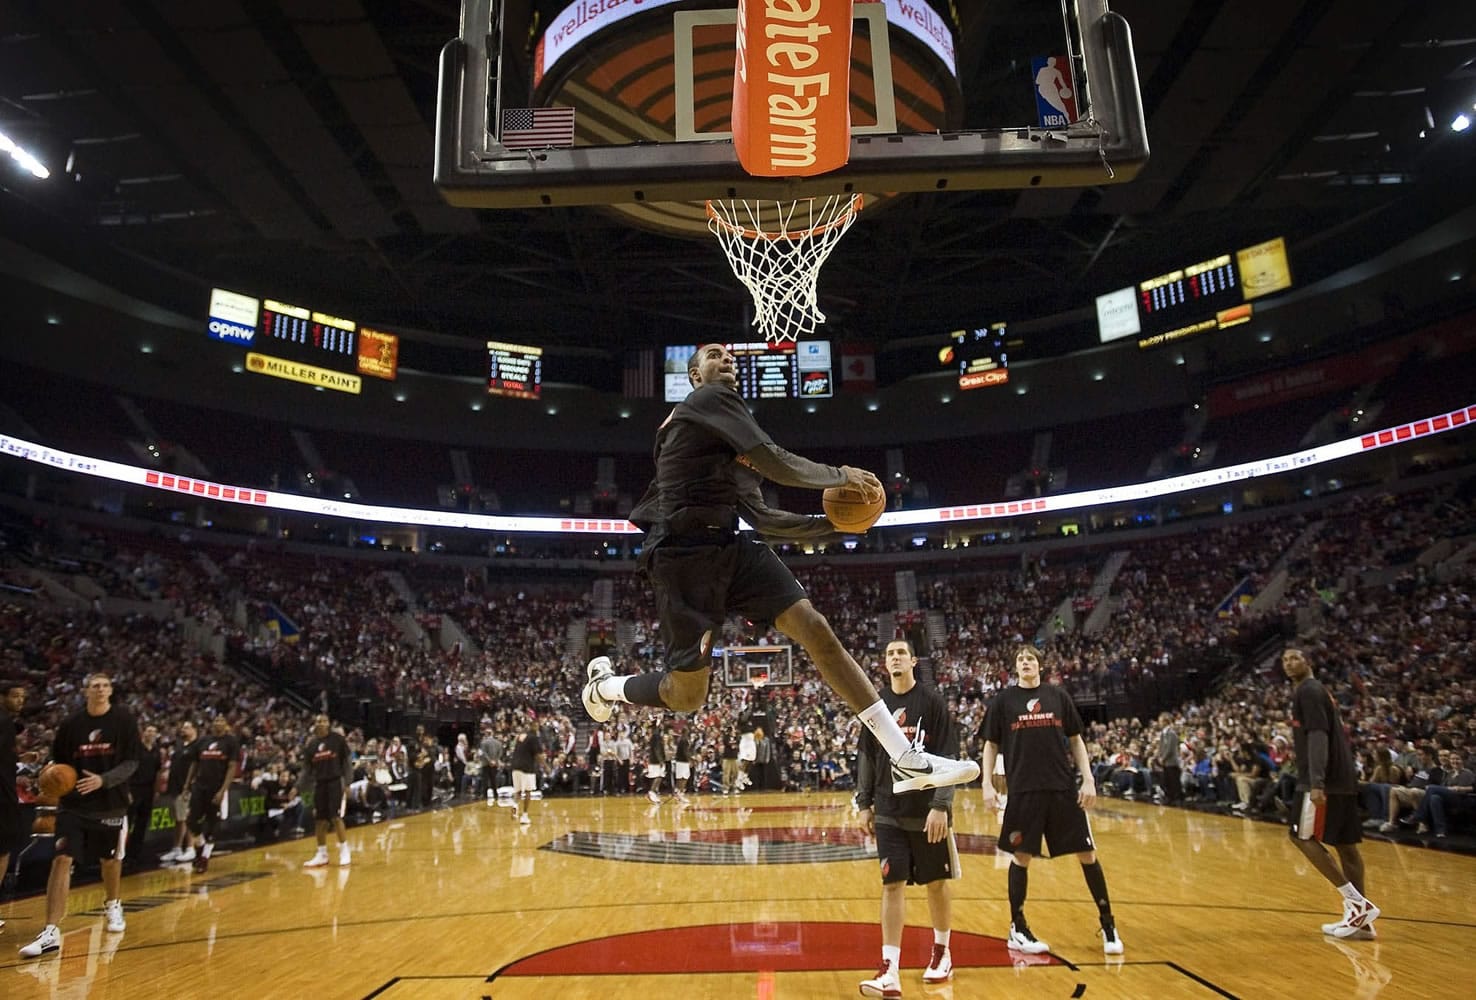 Elliot Williams dunks the ball during warm-ups before a scrimmage during Blazer Fan Fest at The Rose Garden on Friday.